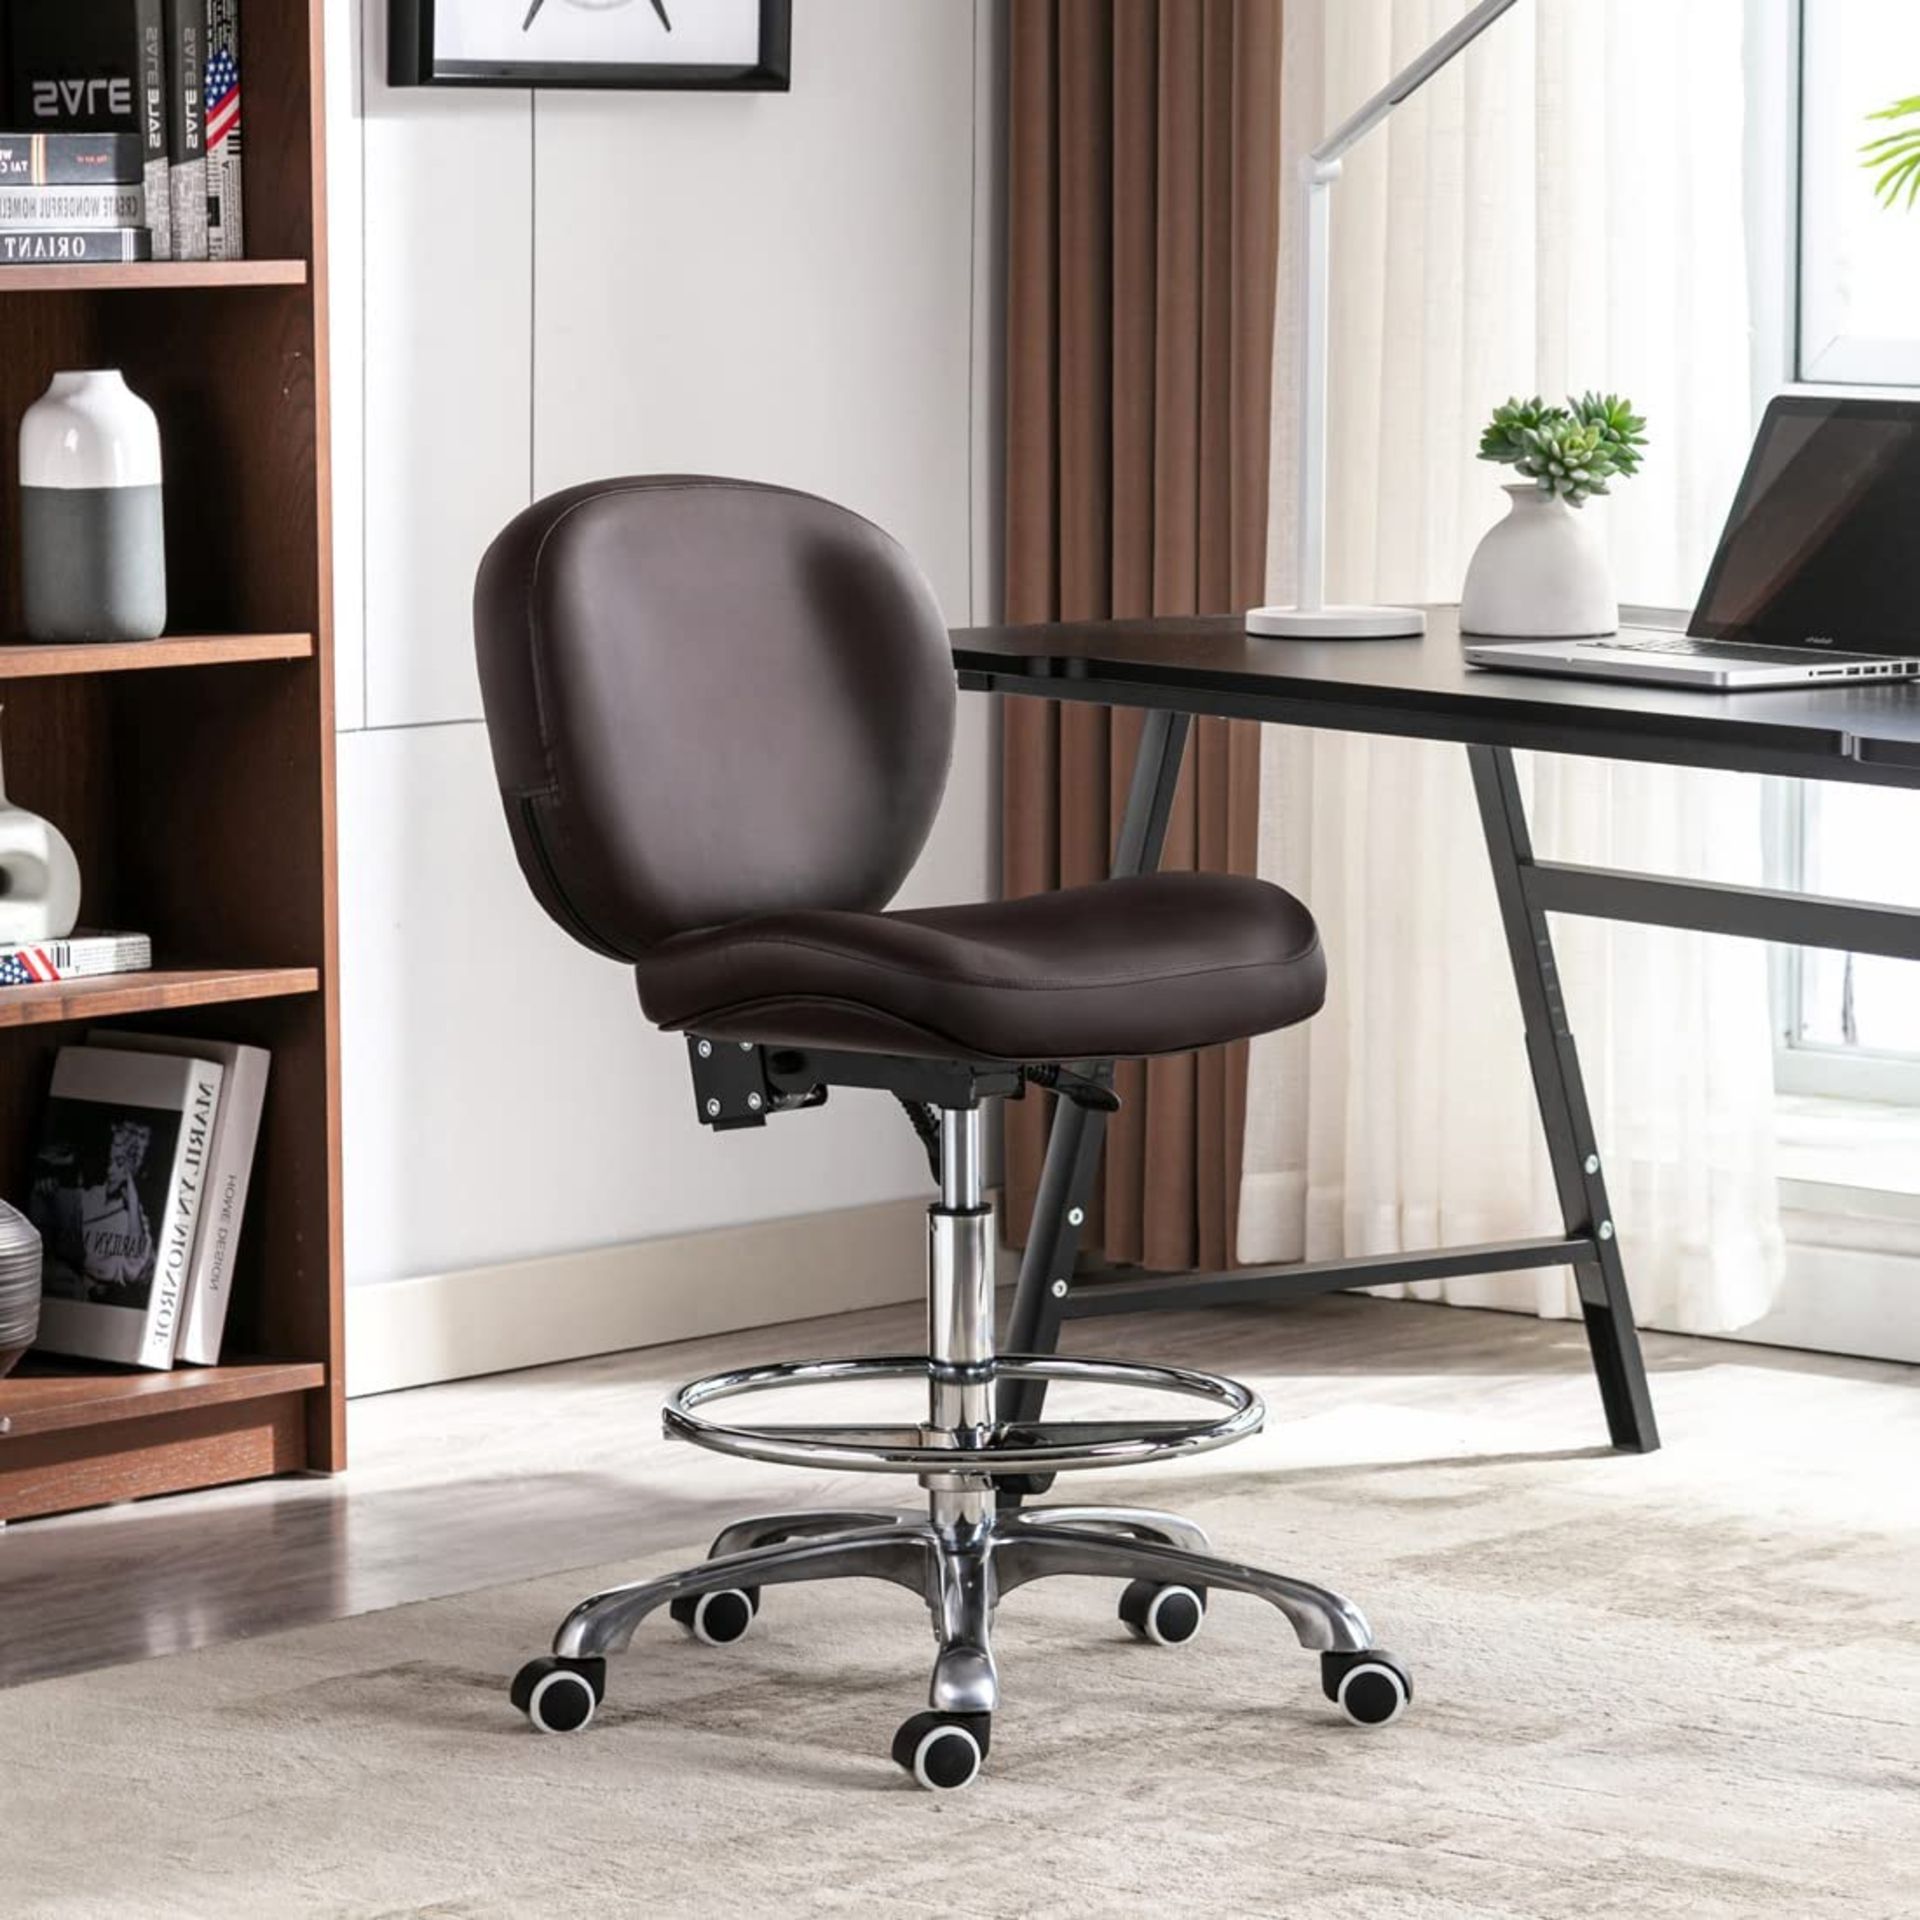 NEW Drafting Chair with Wheels Ergonomic Studio Chair with Adjustable Footrest and Backrest PU